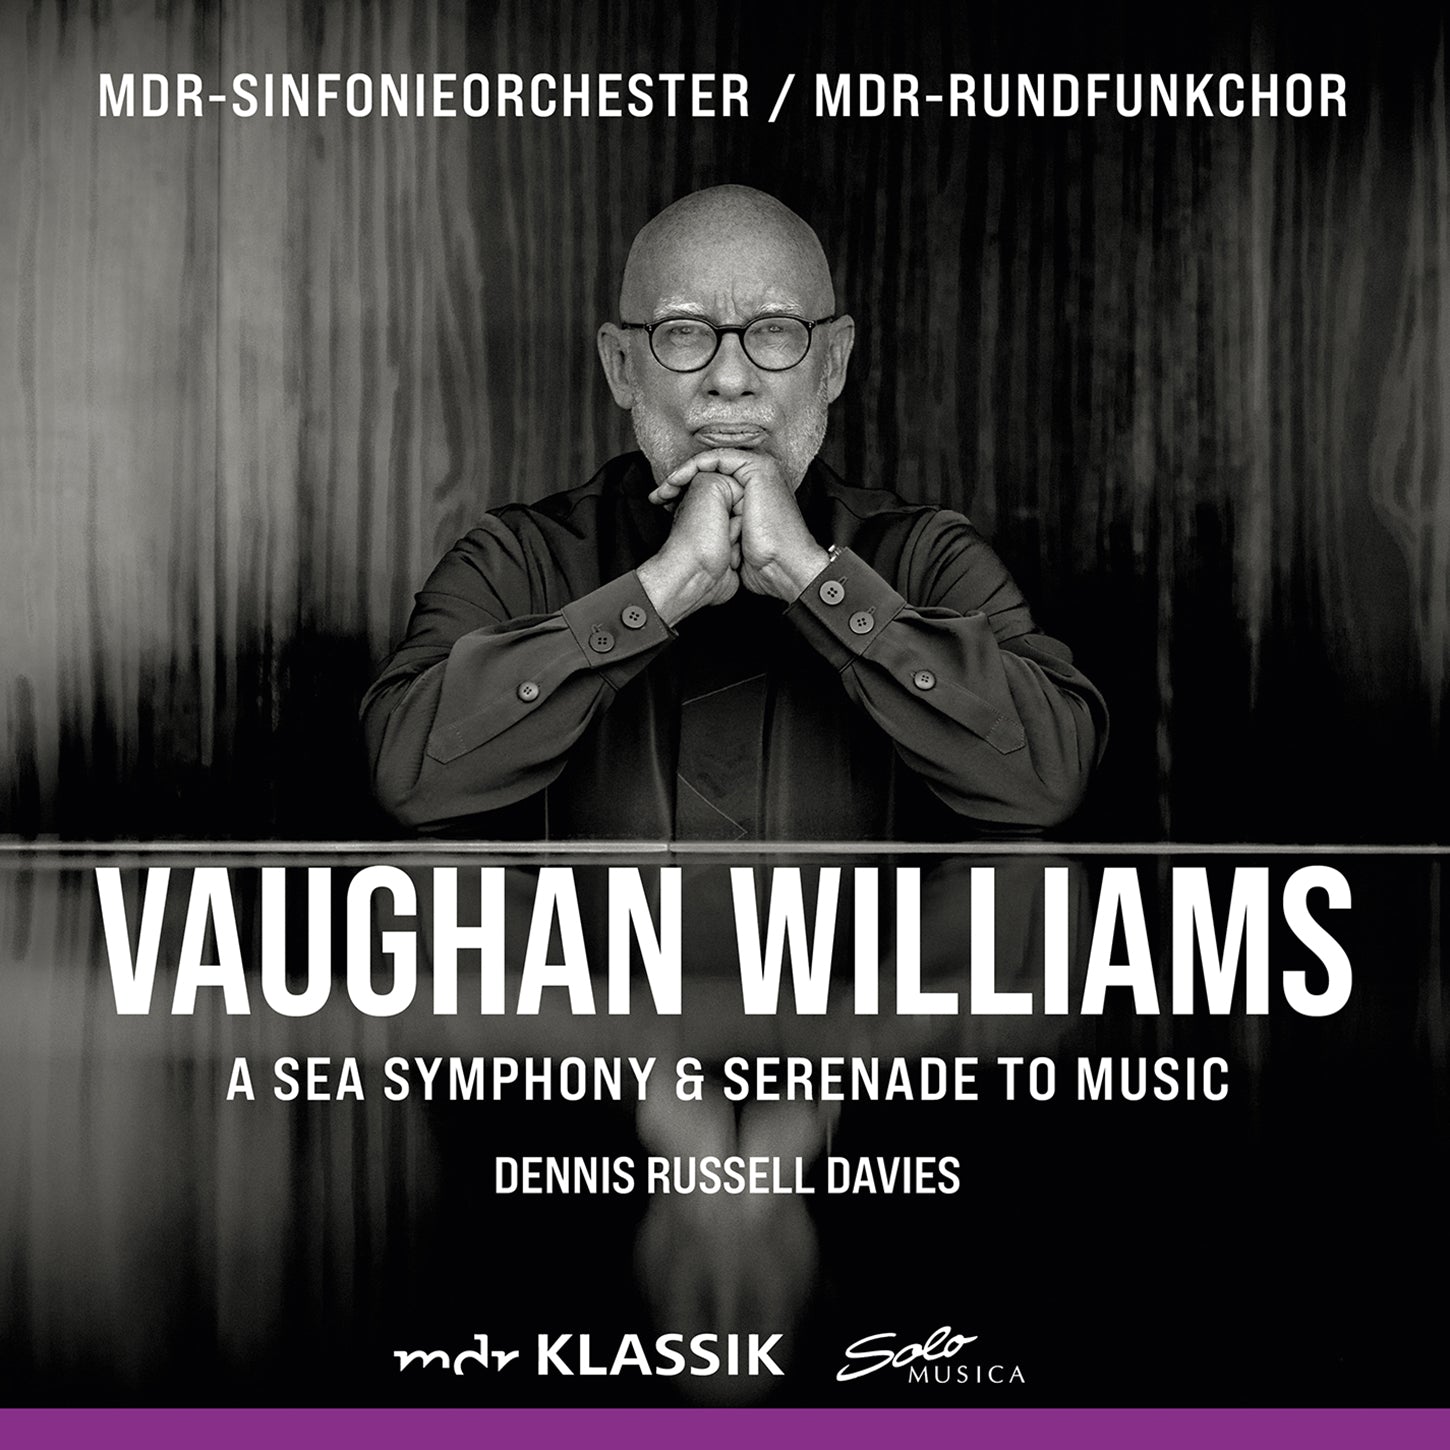 Vaughan Williams: Sea Symphony & Serenade to Music / Davies, MDR Symphony